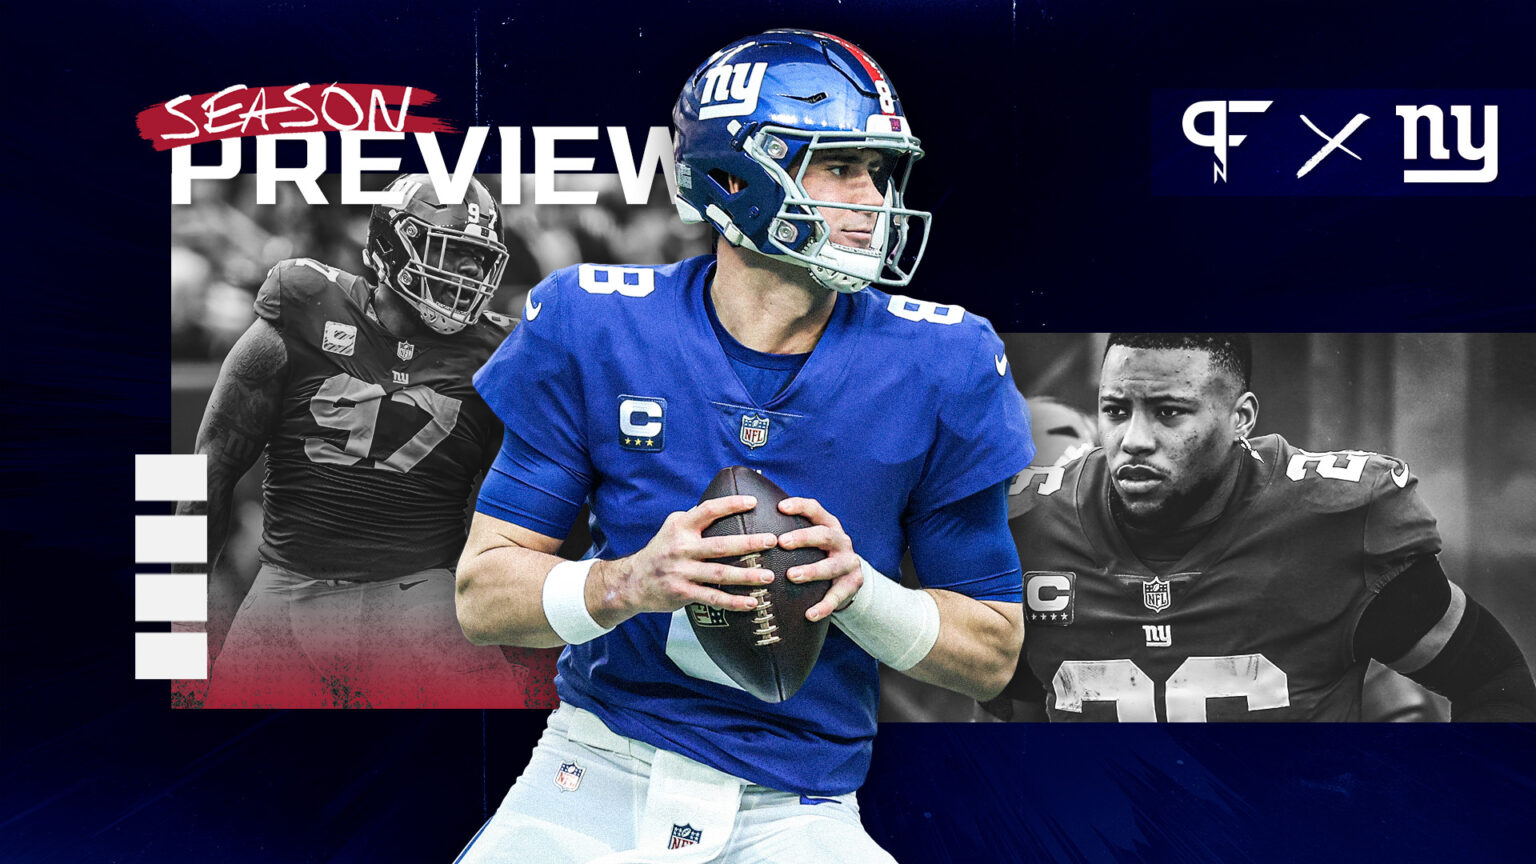 New York Giants Season Preview Projected Depth Chart, Rosters, and